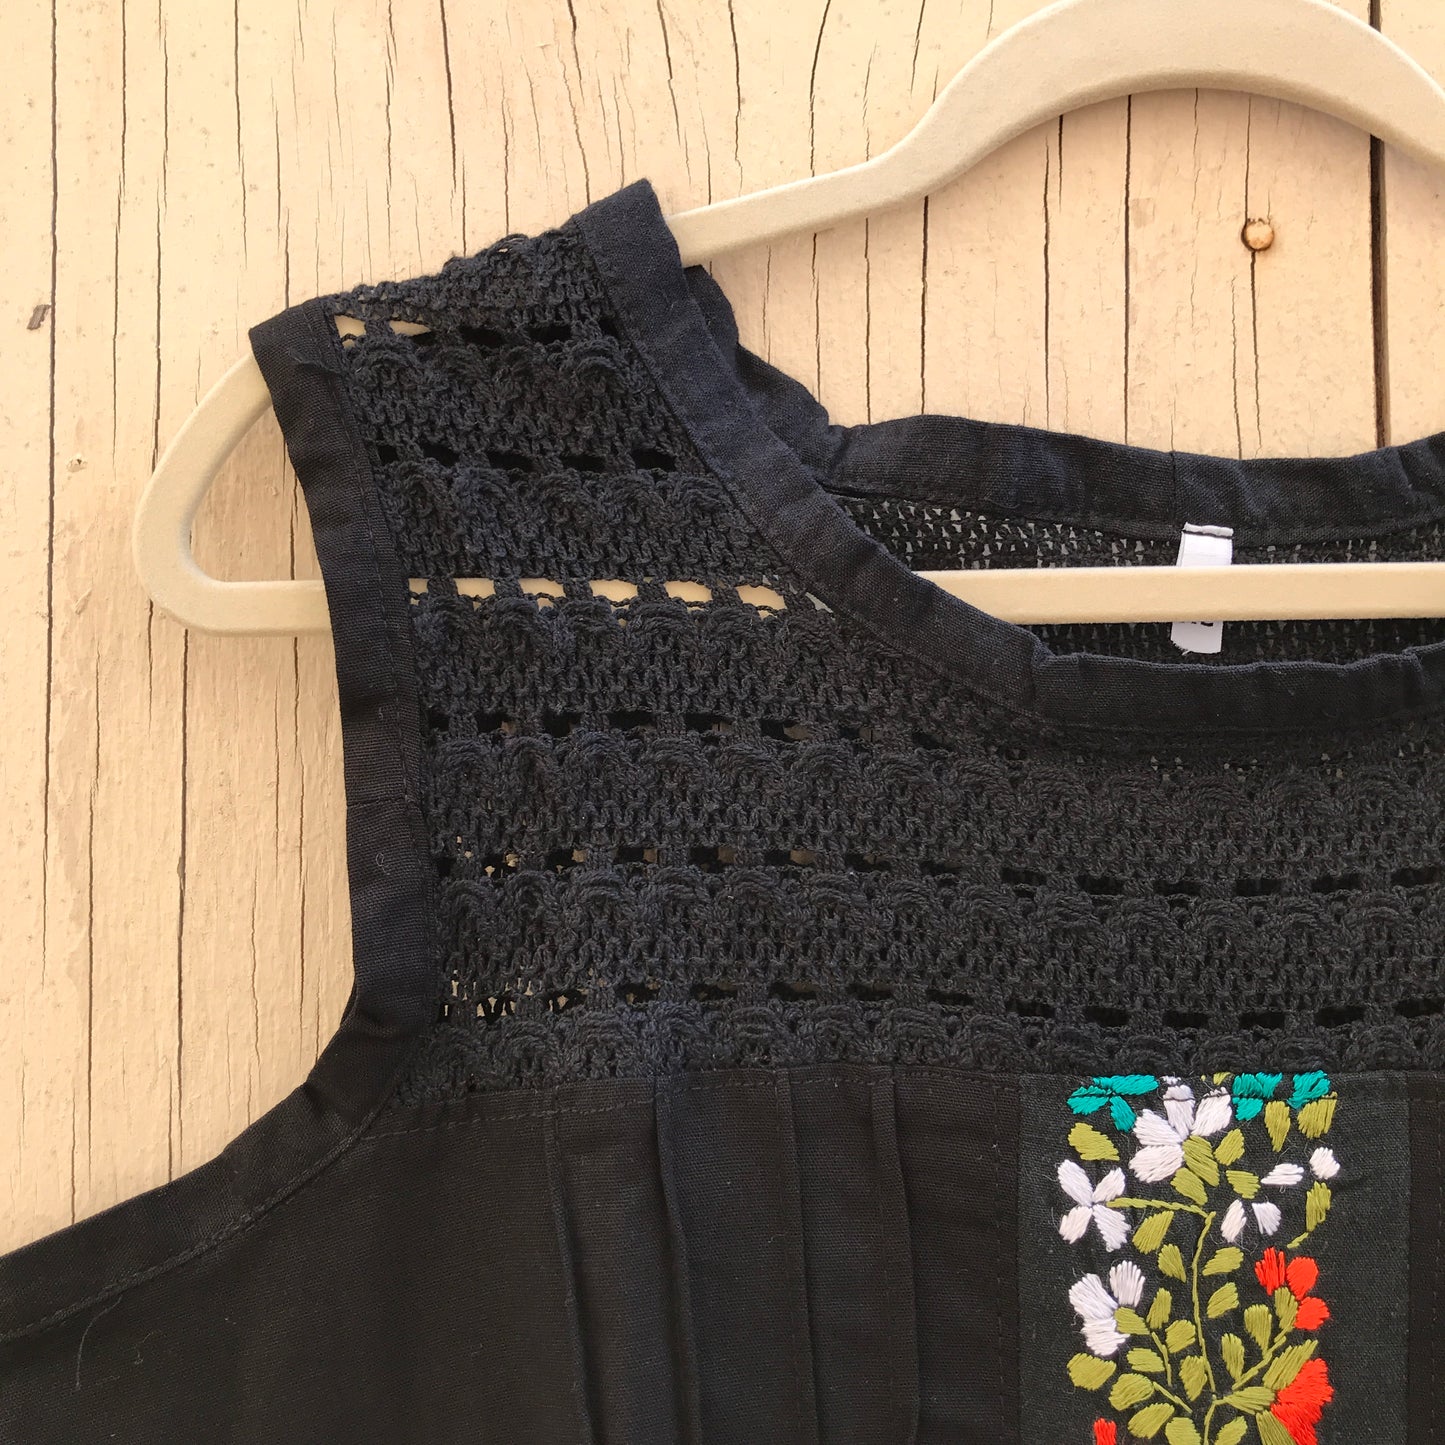 Embroidered and Crotchet Tank Top